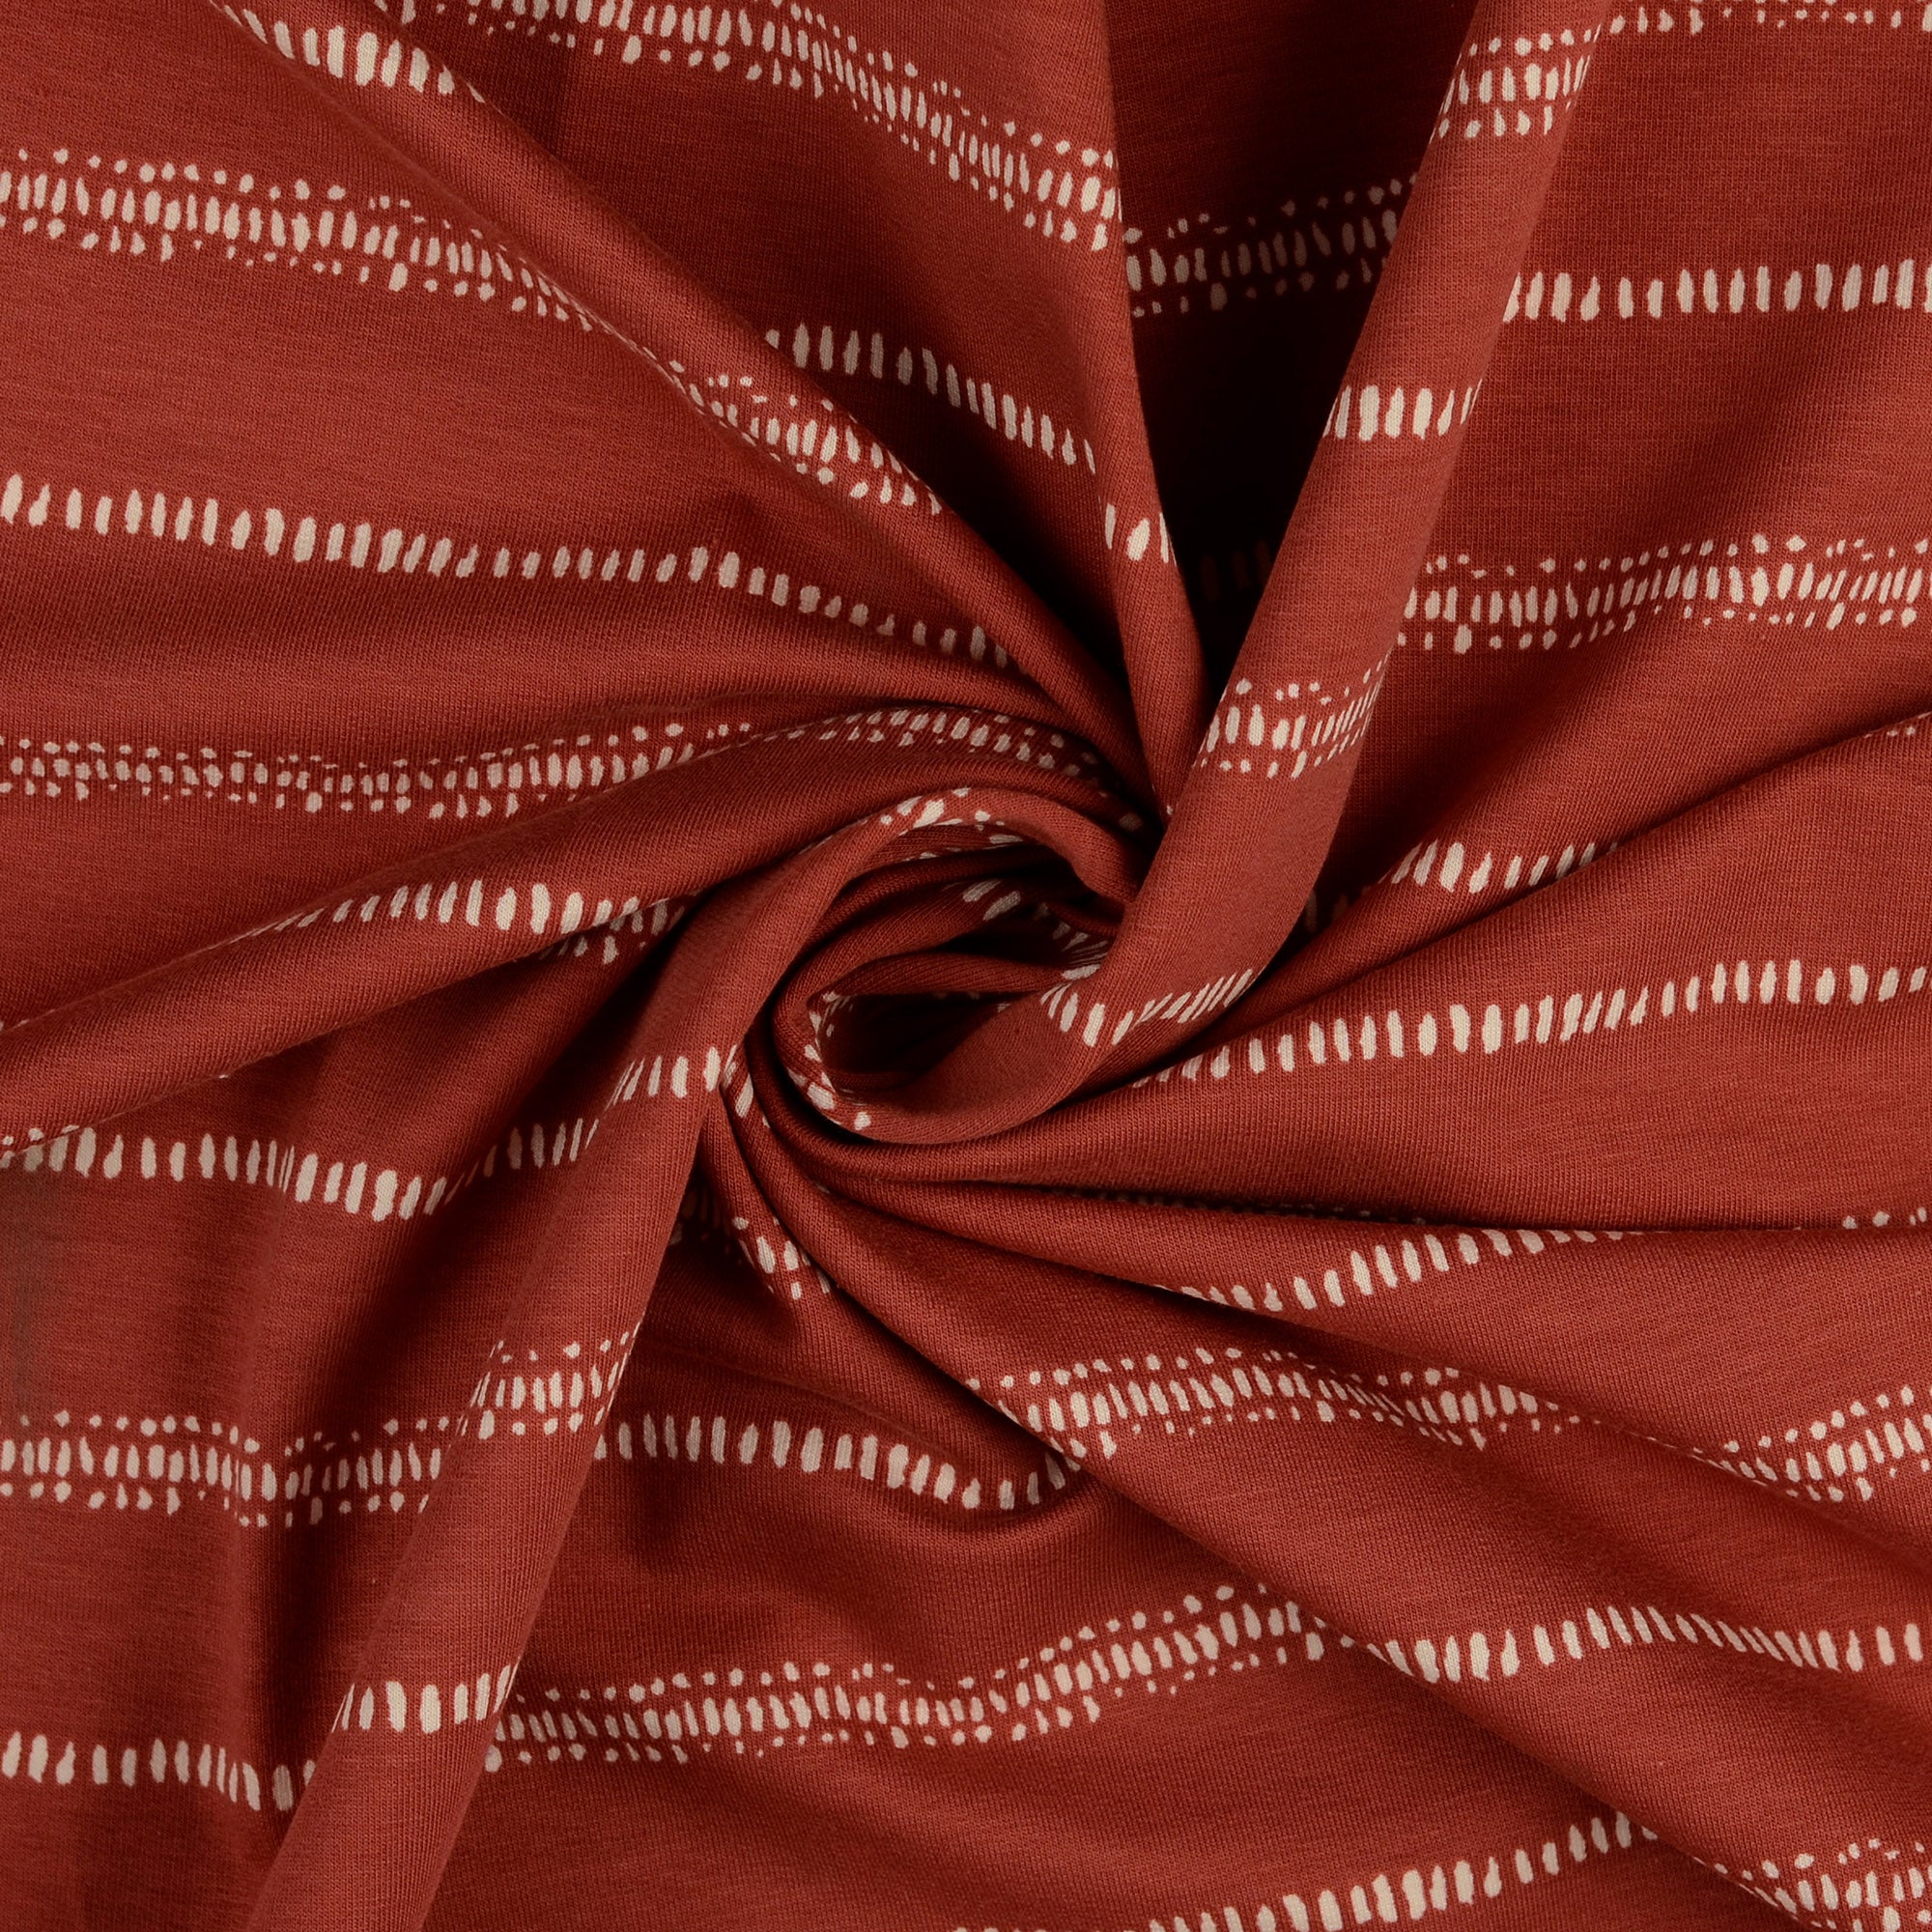 Broken Lines on Tandoori Spice Cotton French Terry Fabric